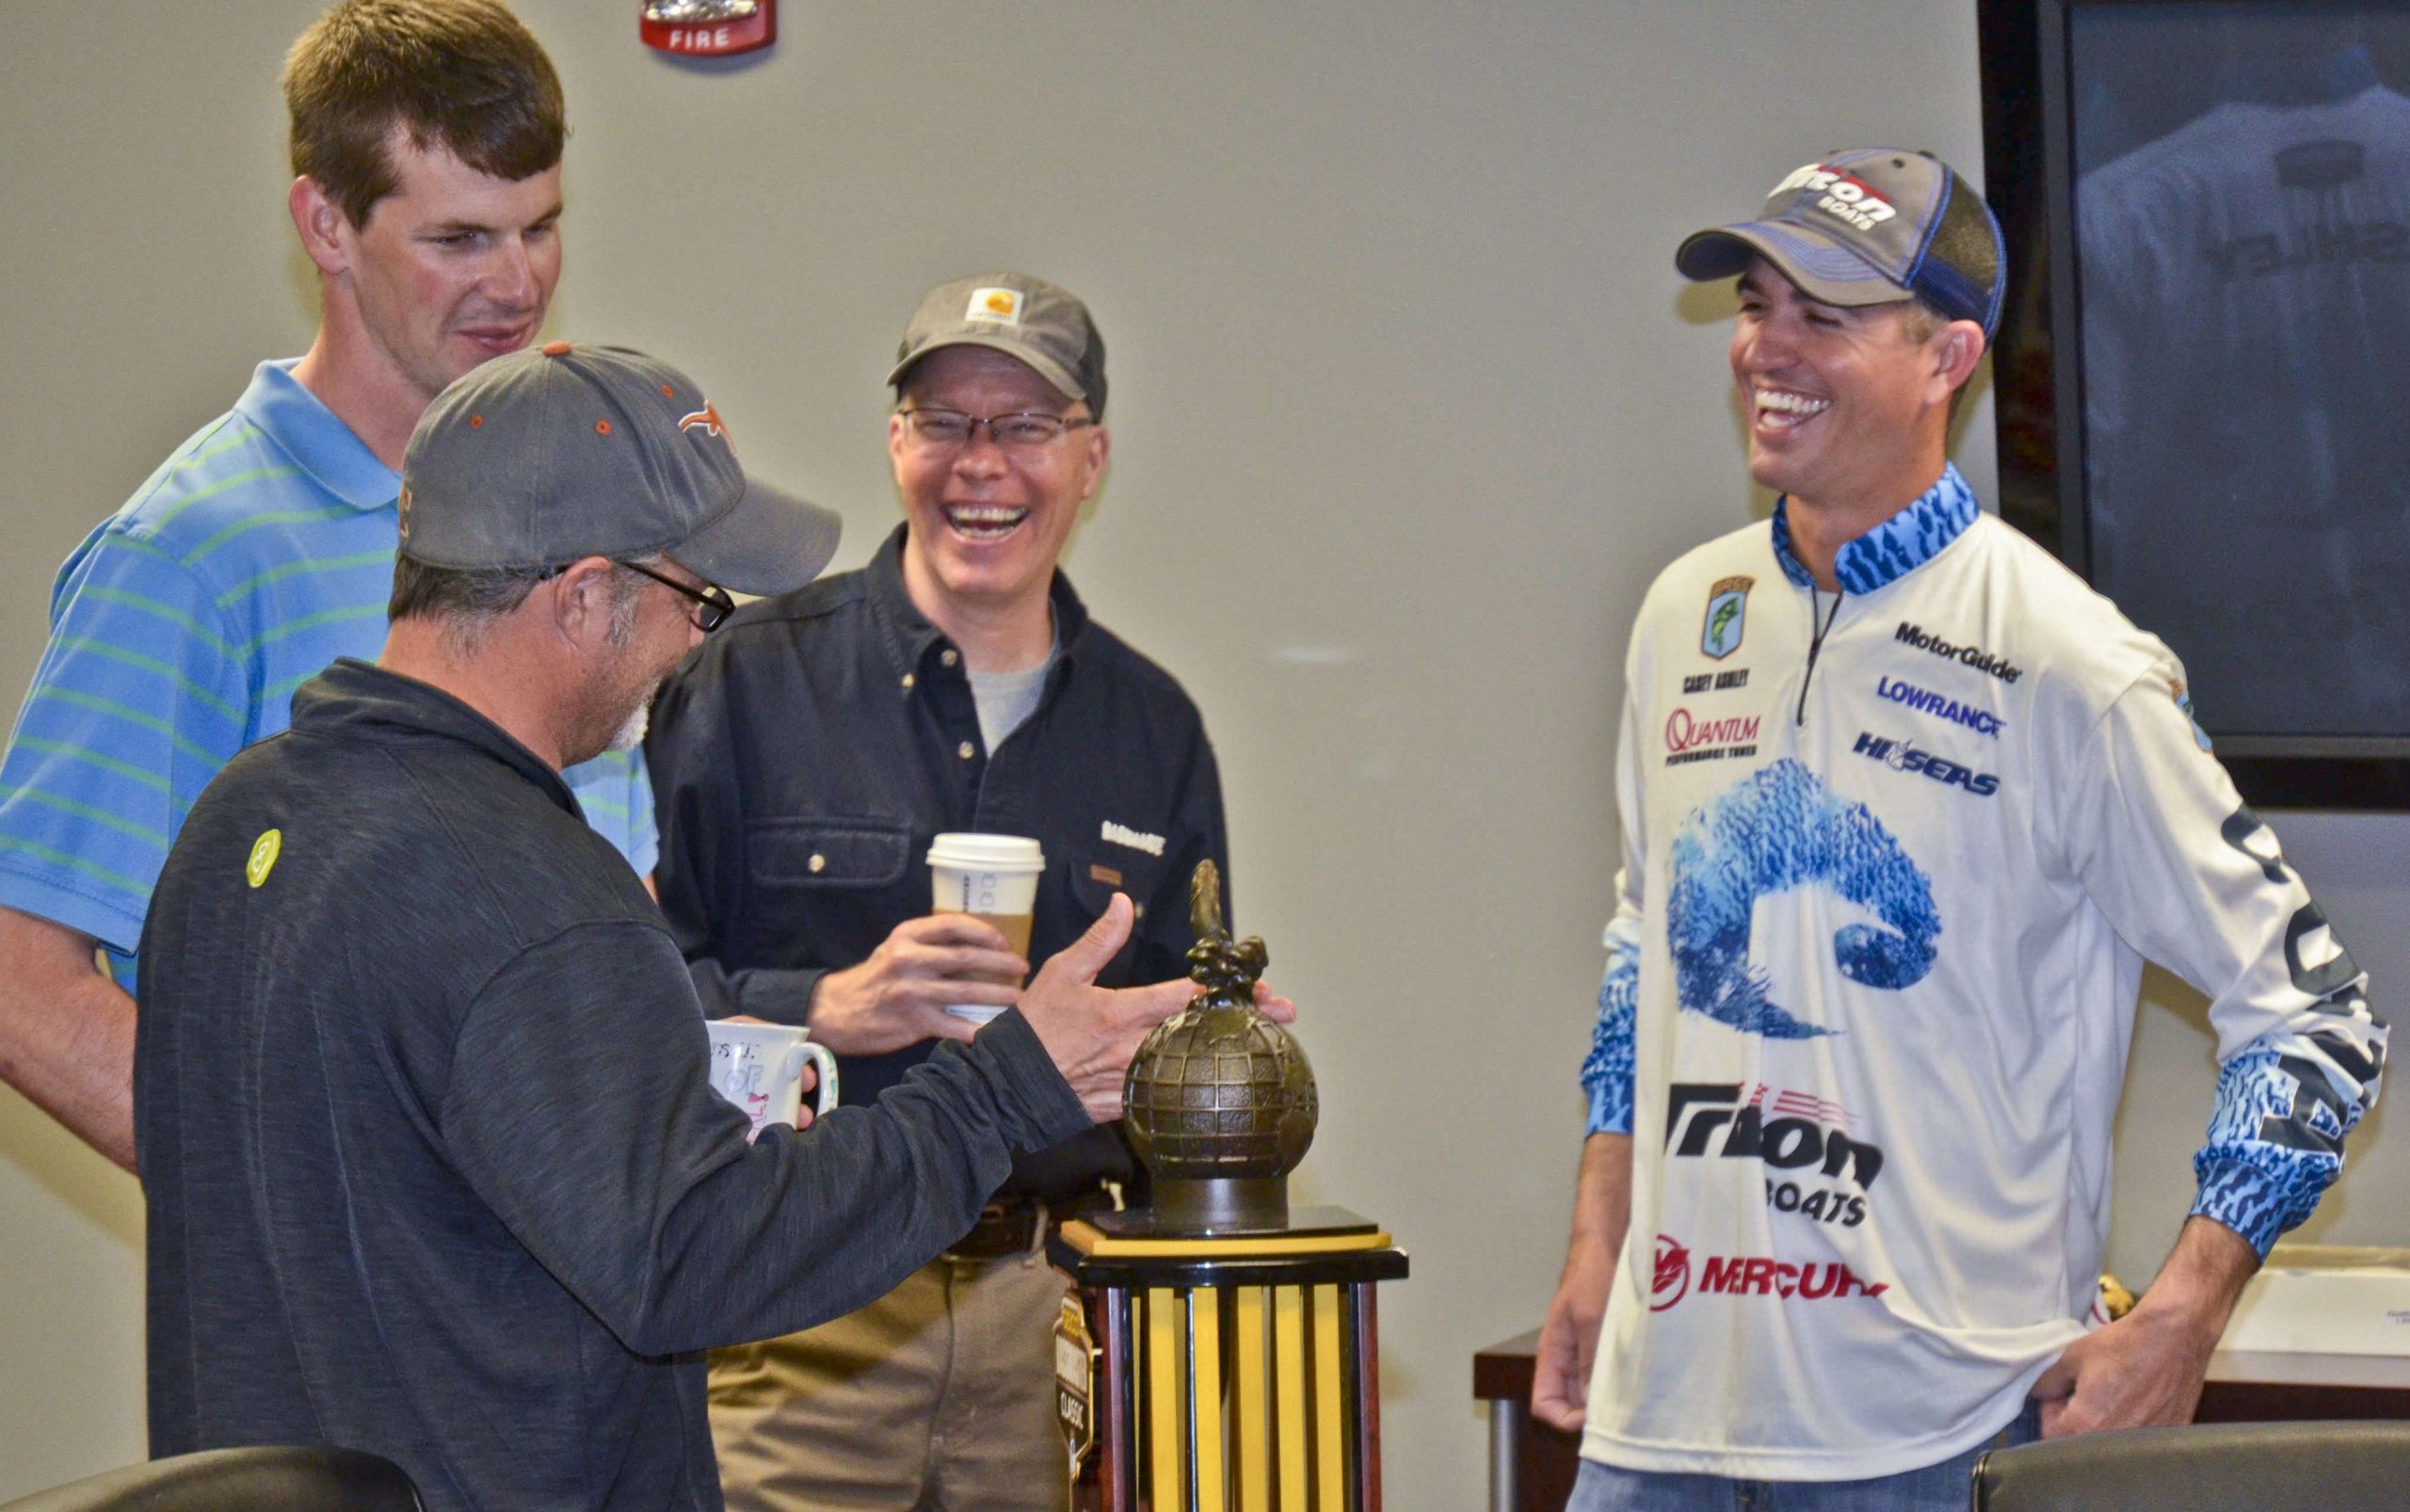 ... and laughed with Bassmaster editor James Hall.